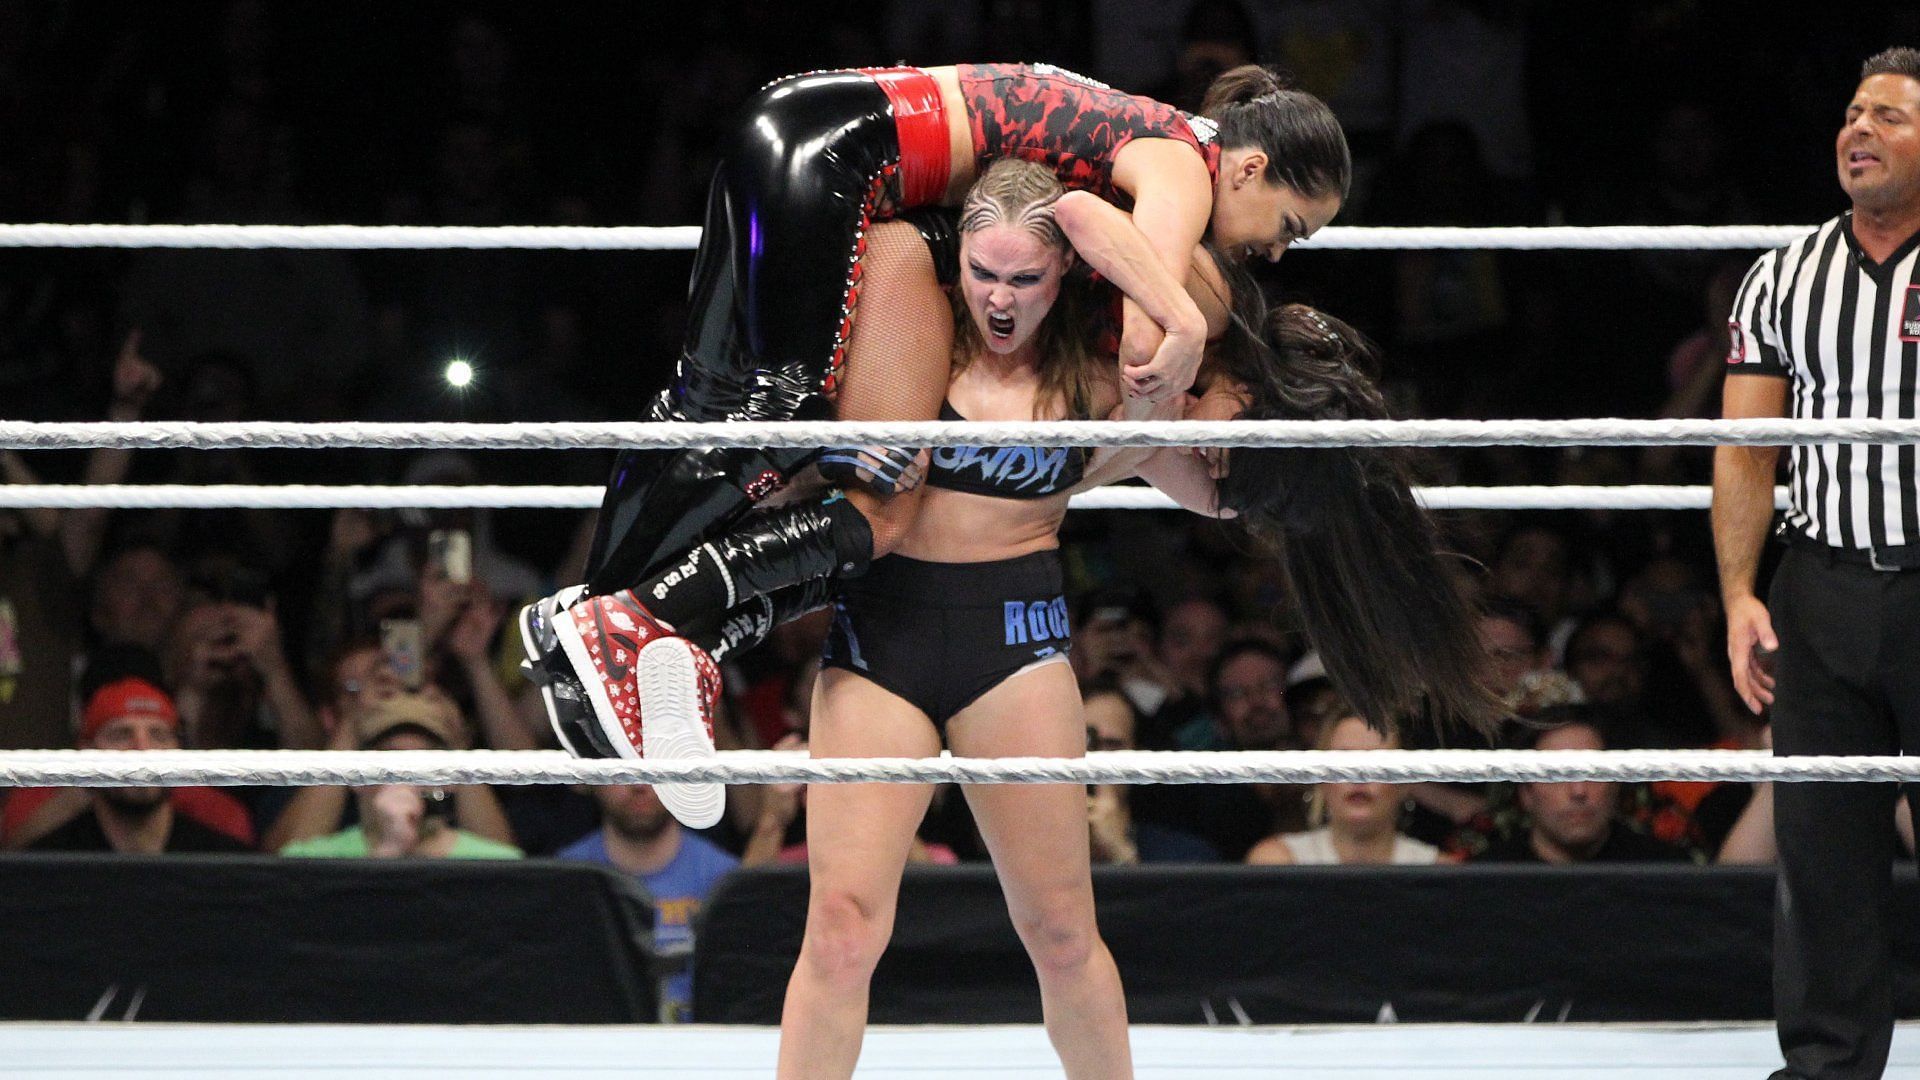 Ronda Rousey and The Bella Twins